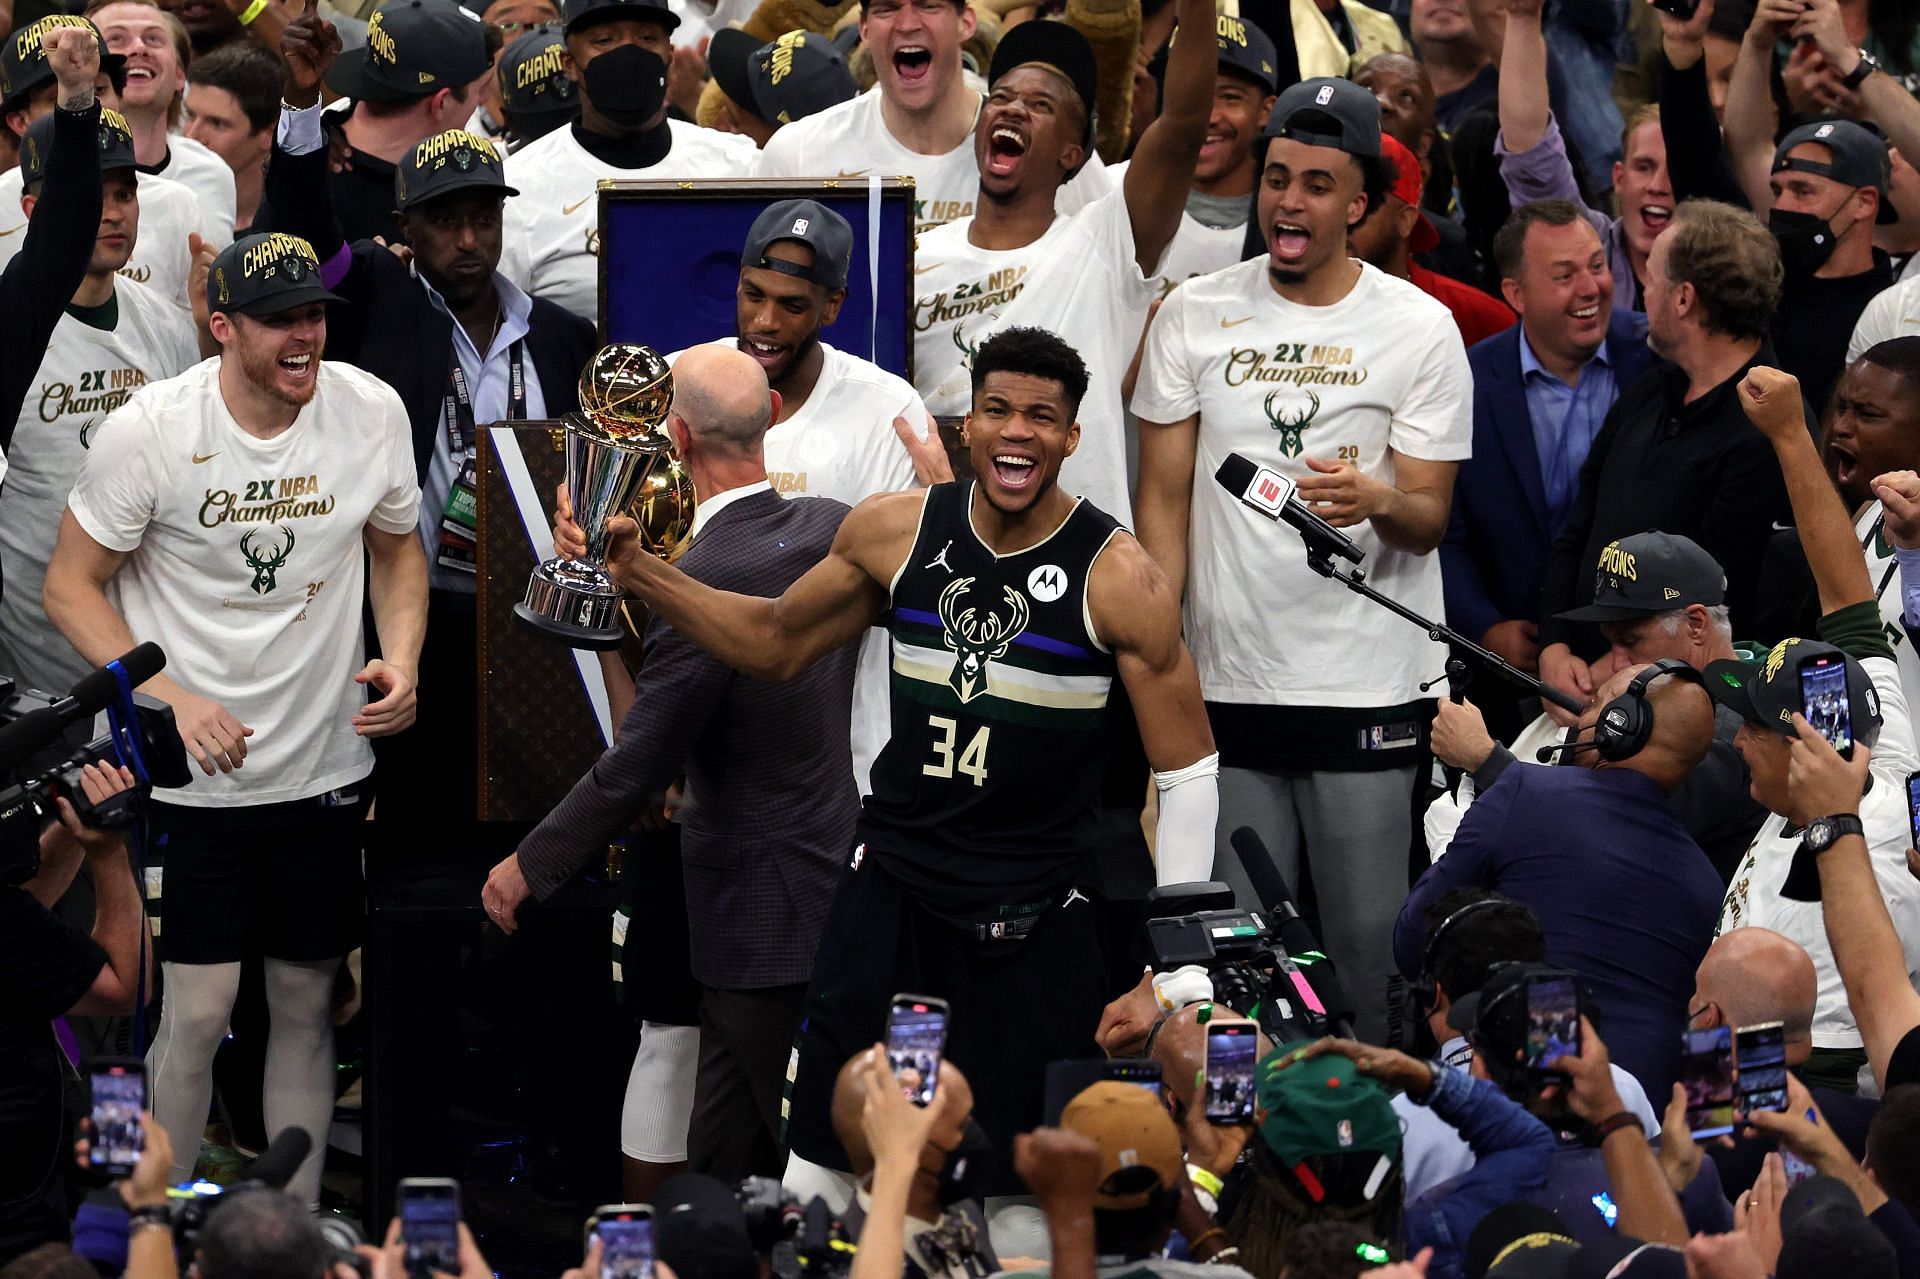 The Milwaukee Bucks are reminding everyone that they are still the NBA champions.